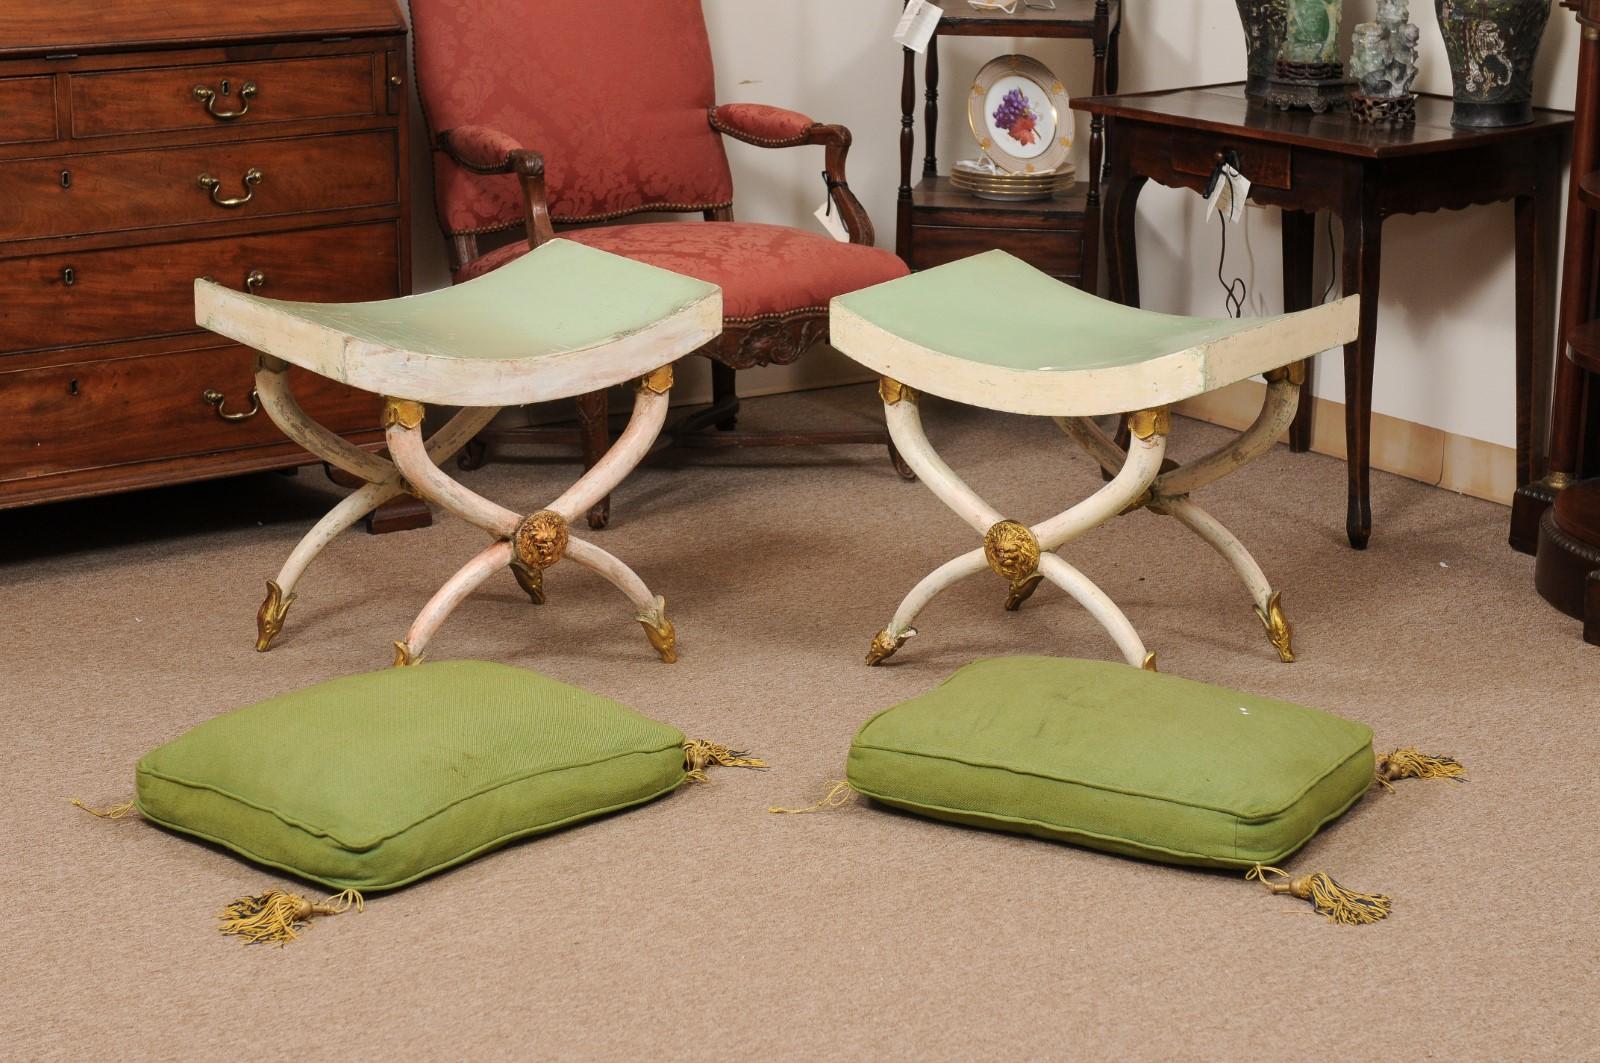 20th Century Pair of Painted and Parcel Gilt Horn Leg Benches with Saddle Seats, Italy  For Sale